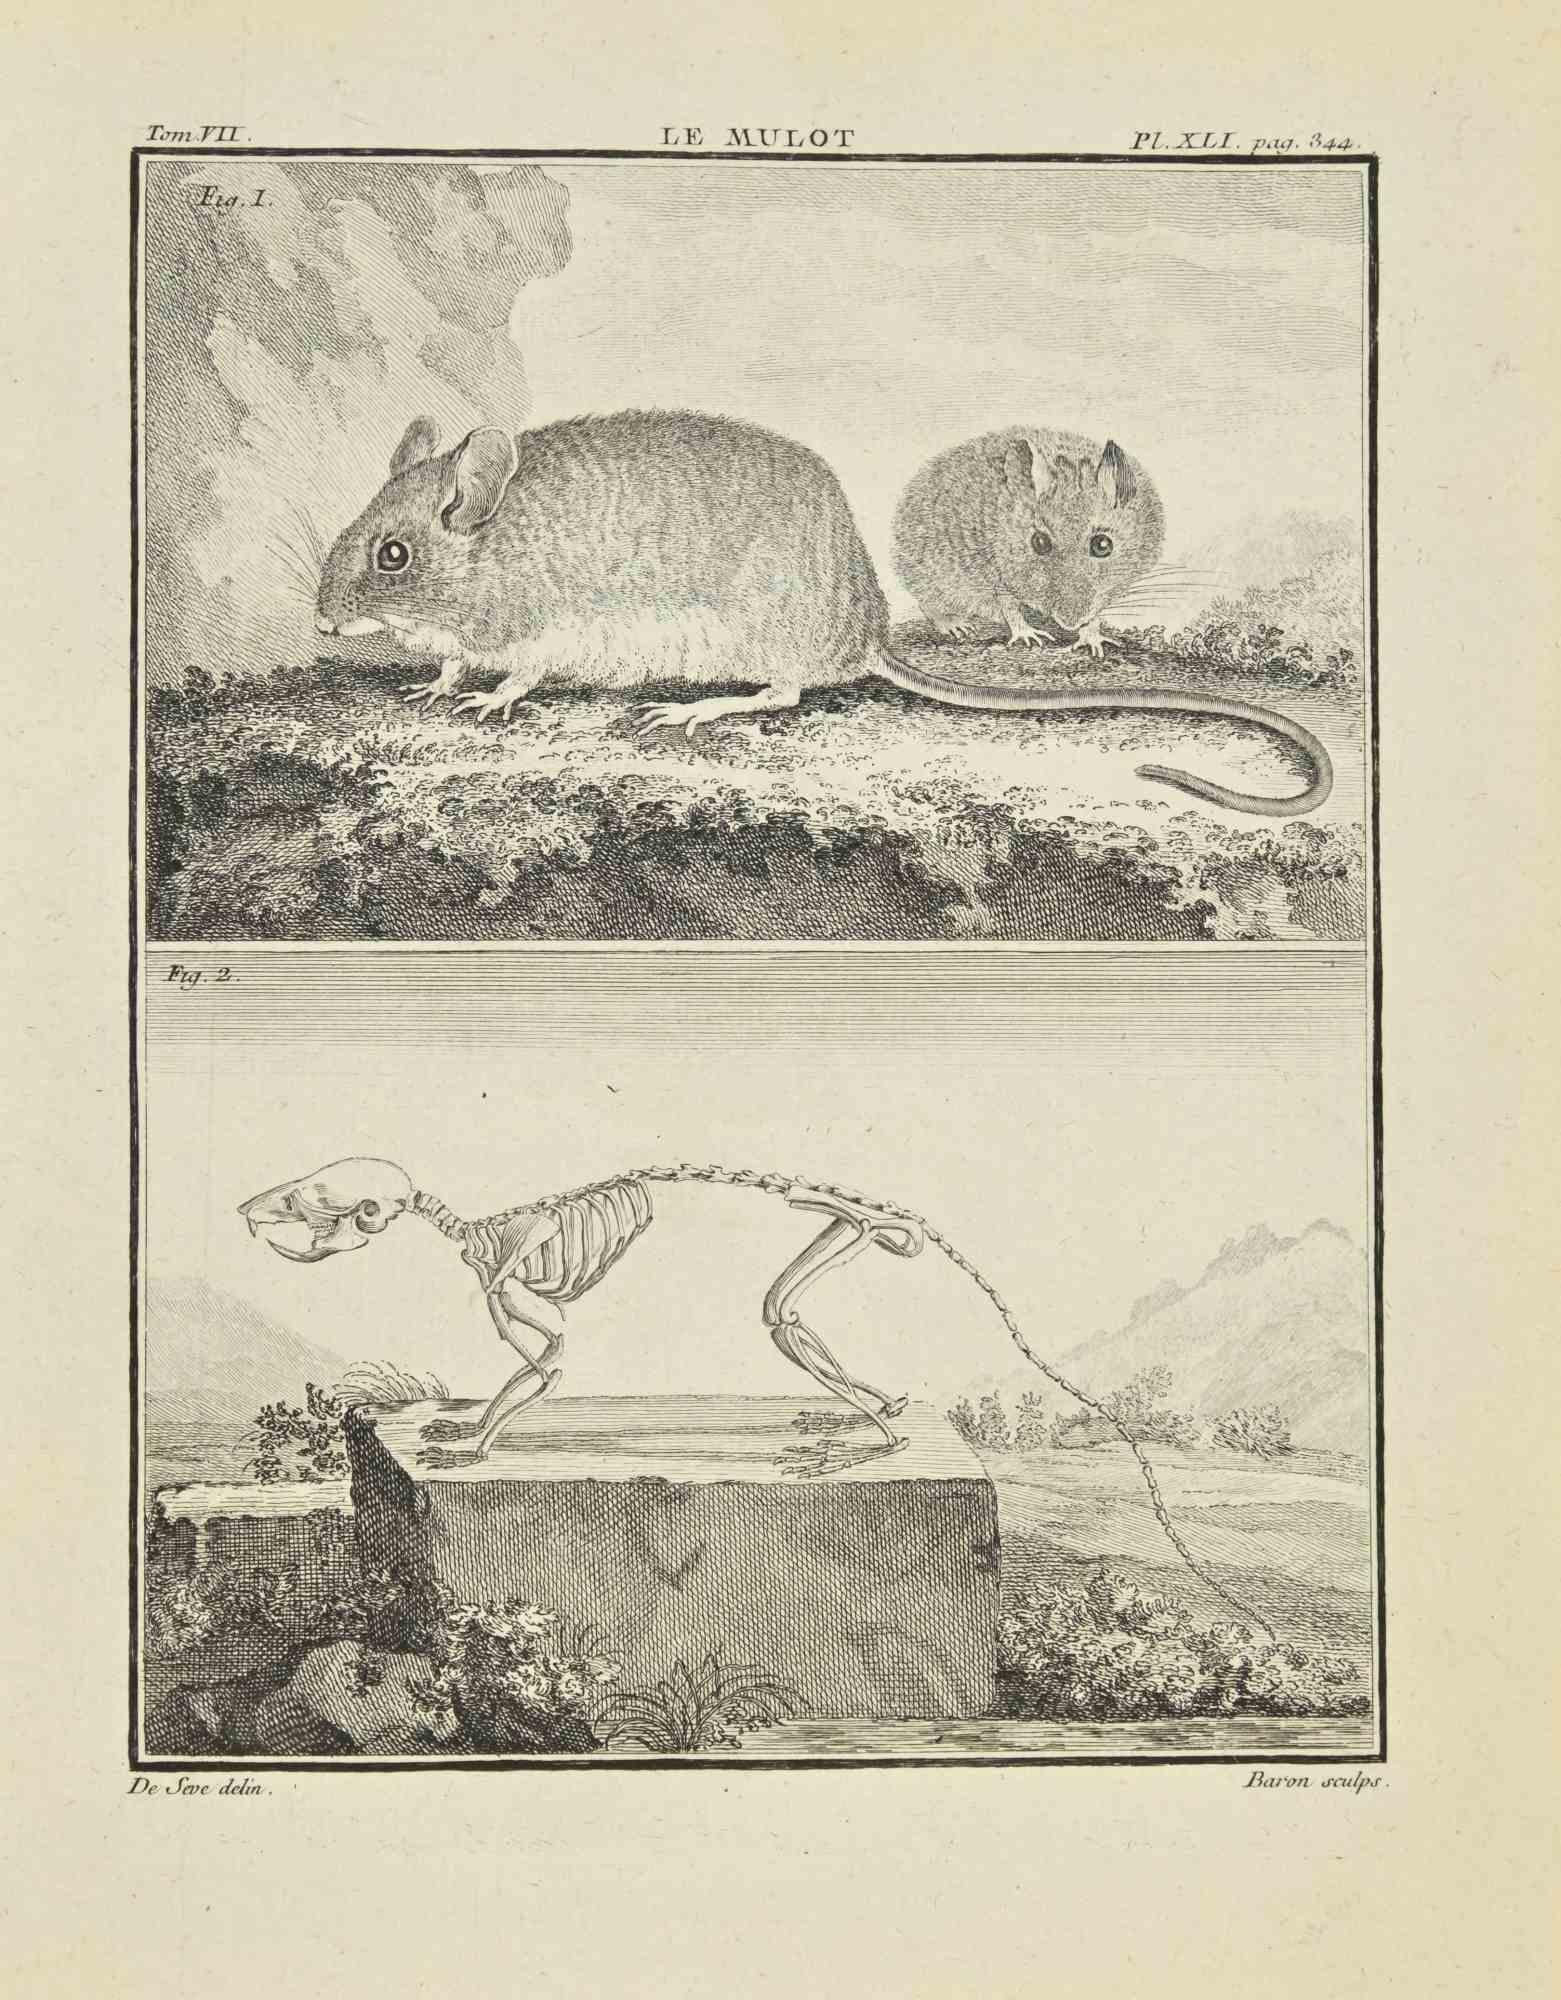 Le Mulot is an etching realized by Jacques Baron in 1771.

It belongs to the suite "Histoire Naturelle de Buffon".

The Artist's signature is engraved lower right.

Good conditions.